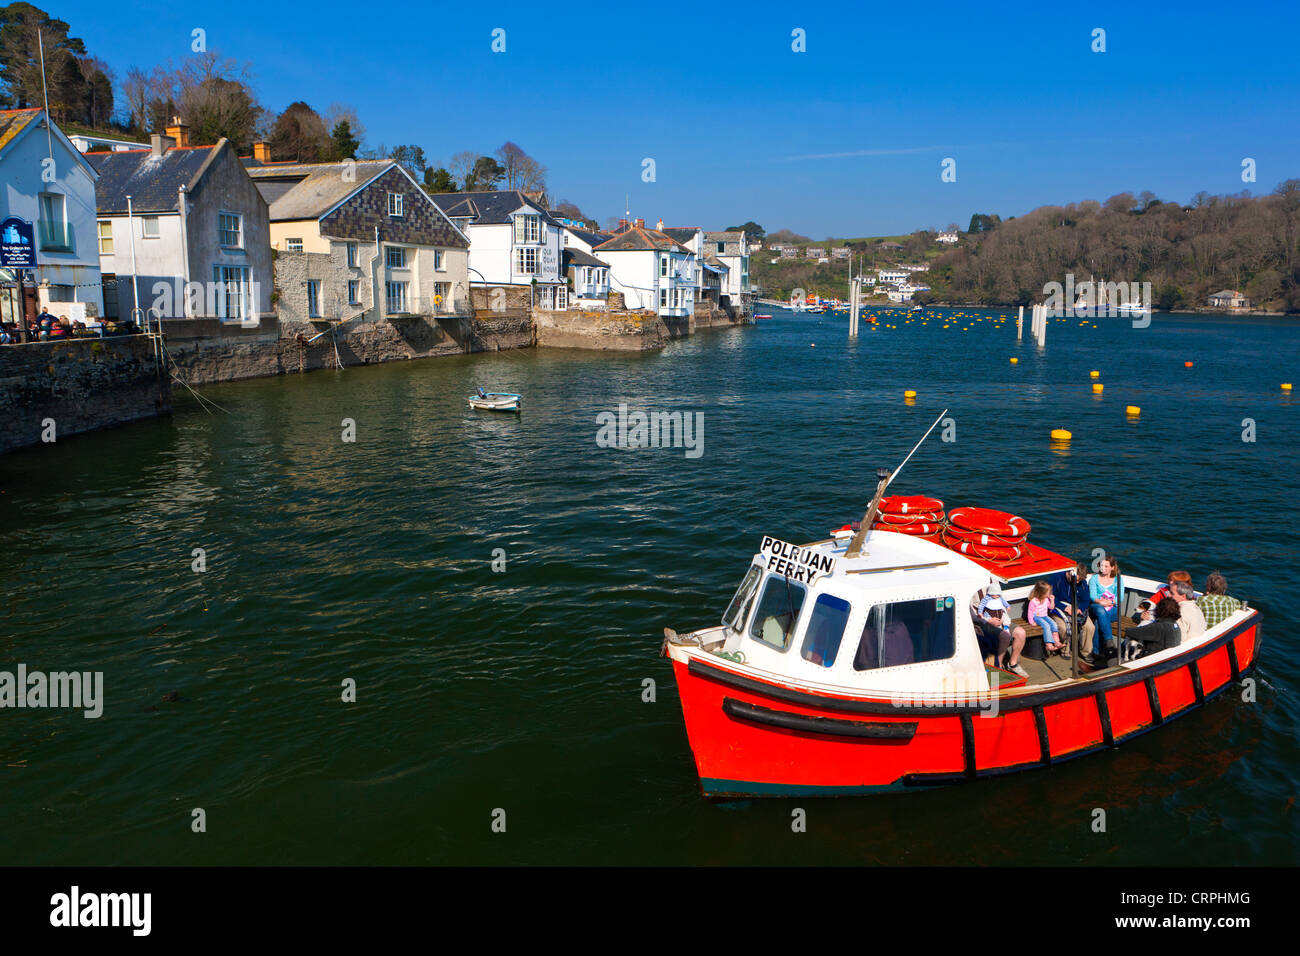 The Polruan Ferry, a passenger ferry that runs between the town of Fowey and village of Polruan at the mouth of the River Fowey. Stock Photo